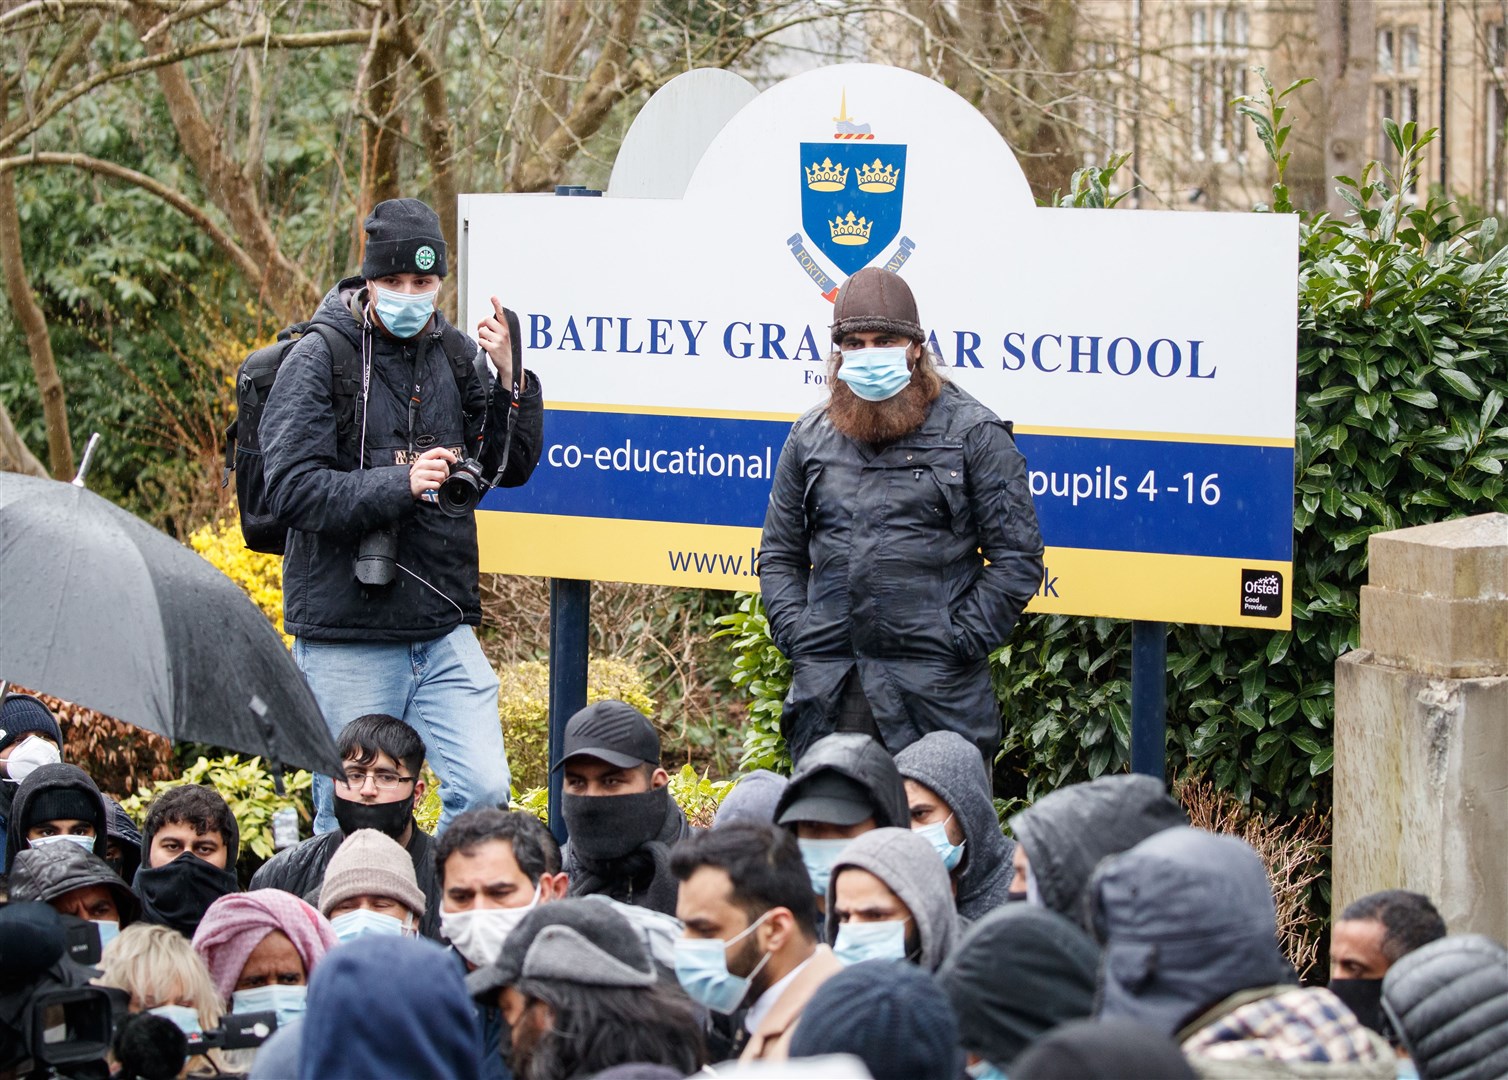 Protesters gathered outside Batley Grammar School where a teacher was suspended for reportedly showing a caricature of the Prophet Mohammed to pupils during a religious studies lesson (Danny Lawson/PA)